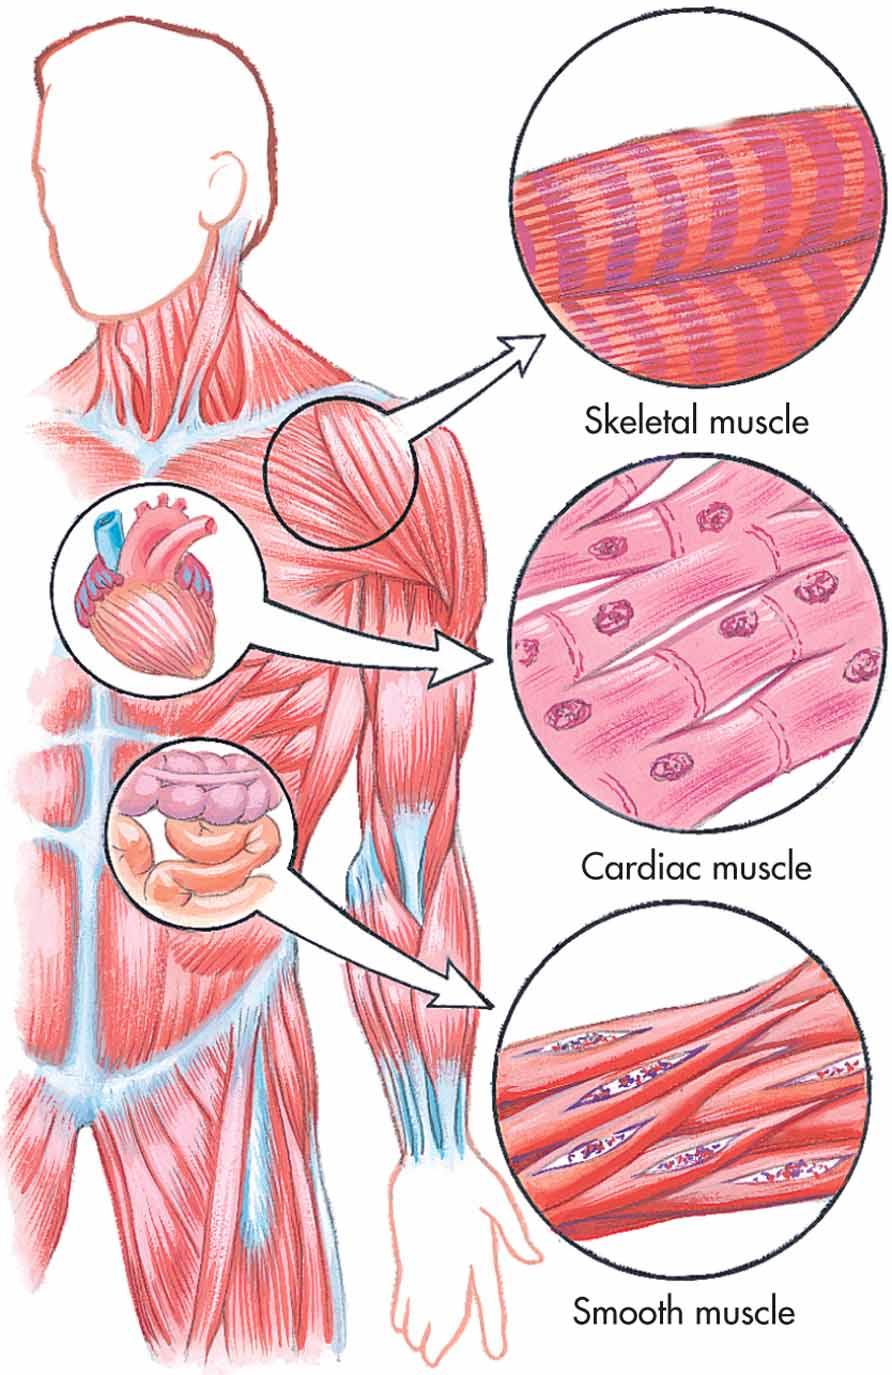 They attach to skeletal muscle fibers on one side and are intermeshed in bone on the other. Tendons must handle a great degree of strain when a muscle contracts.